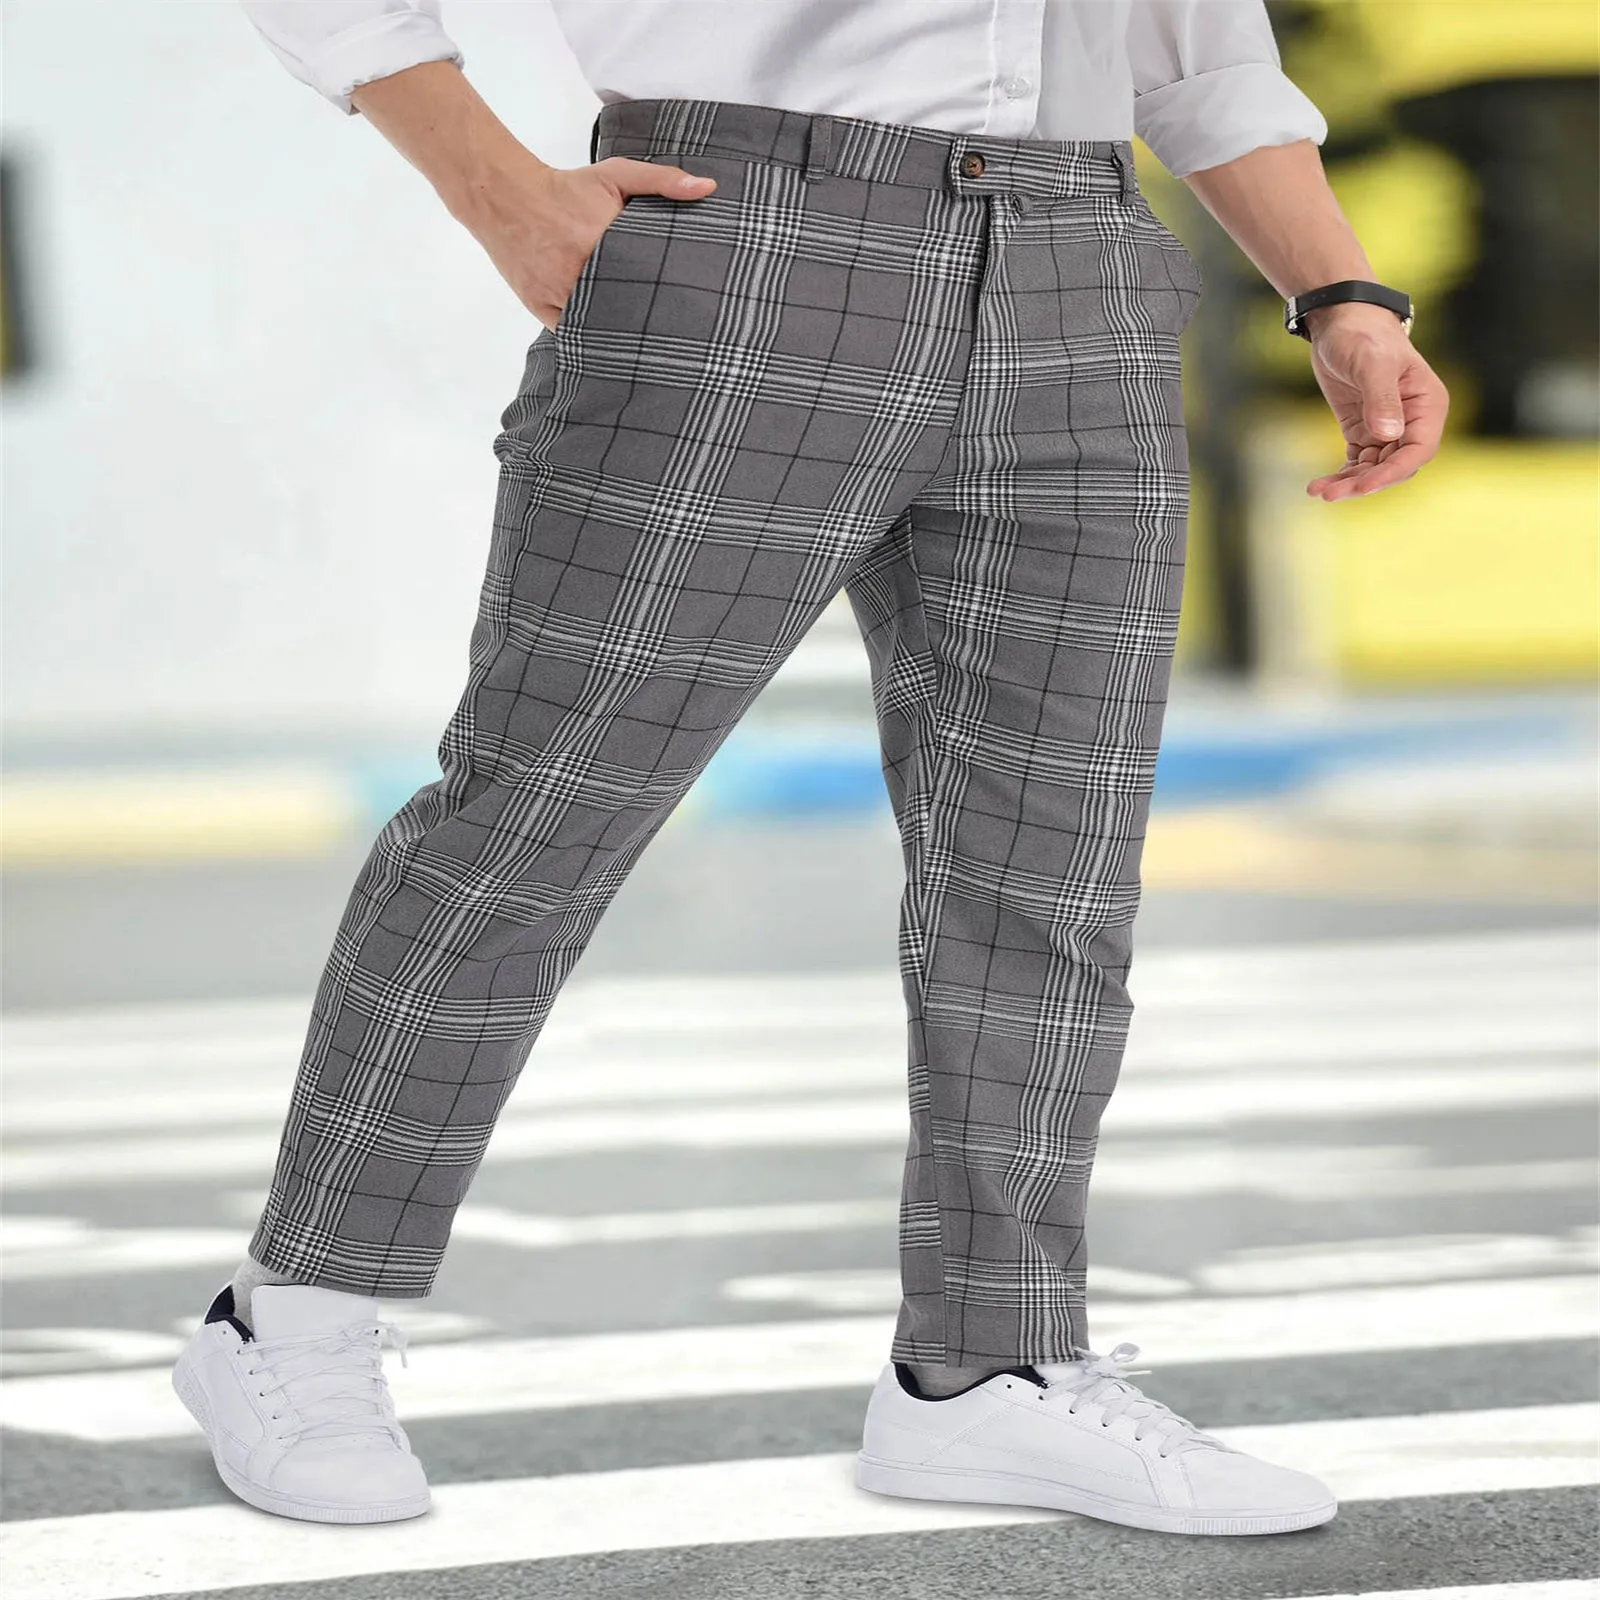 

Mens Plain Suit Pant British Dress Cargo Pants Casual Relaxed Fit Sport Jogger Drawstring Outdoor Trousers Pockets Pantalones